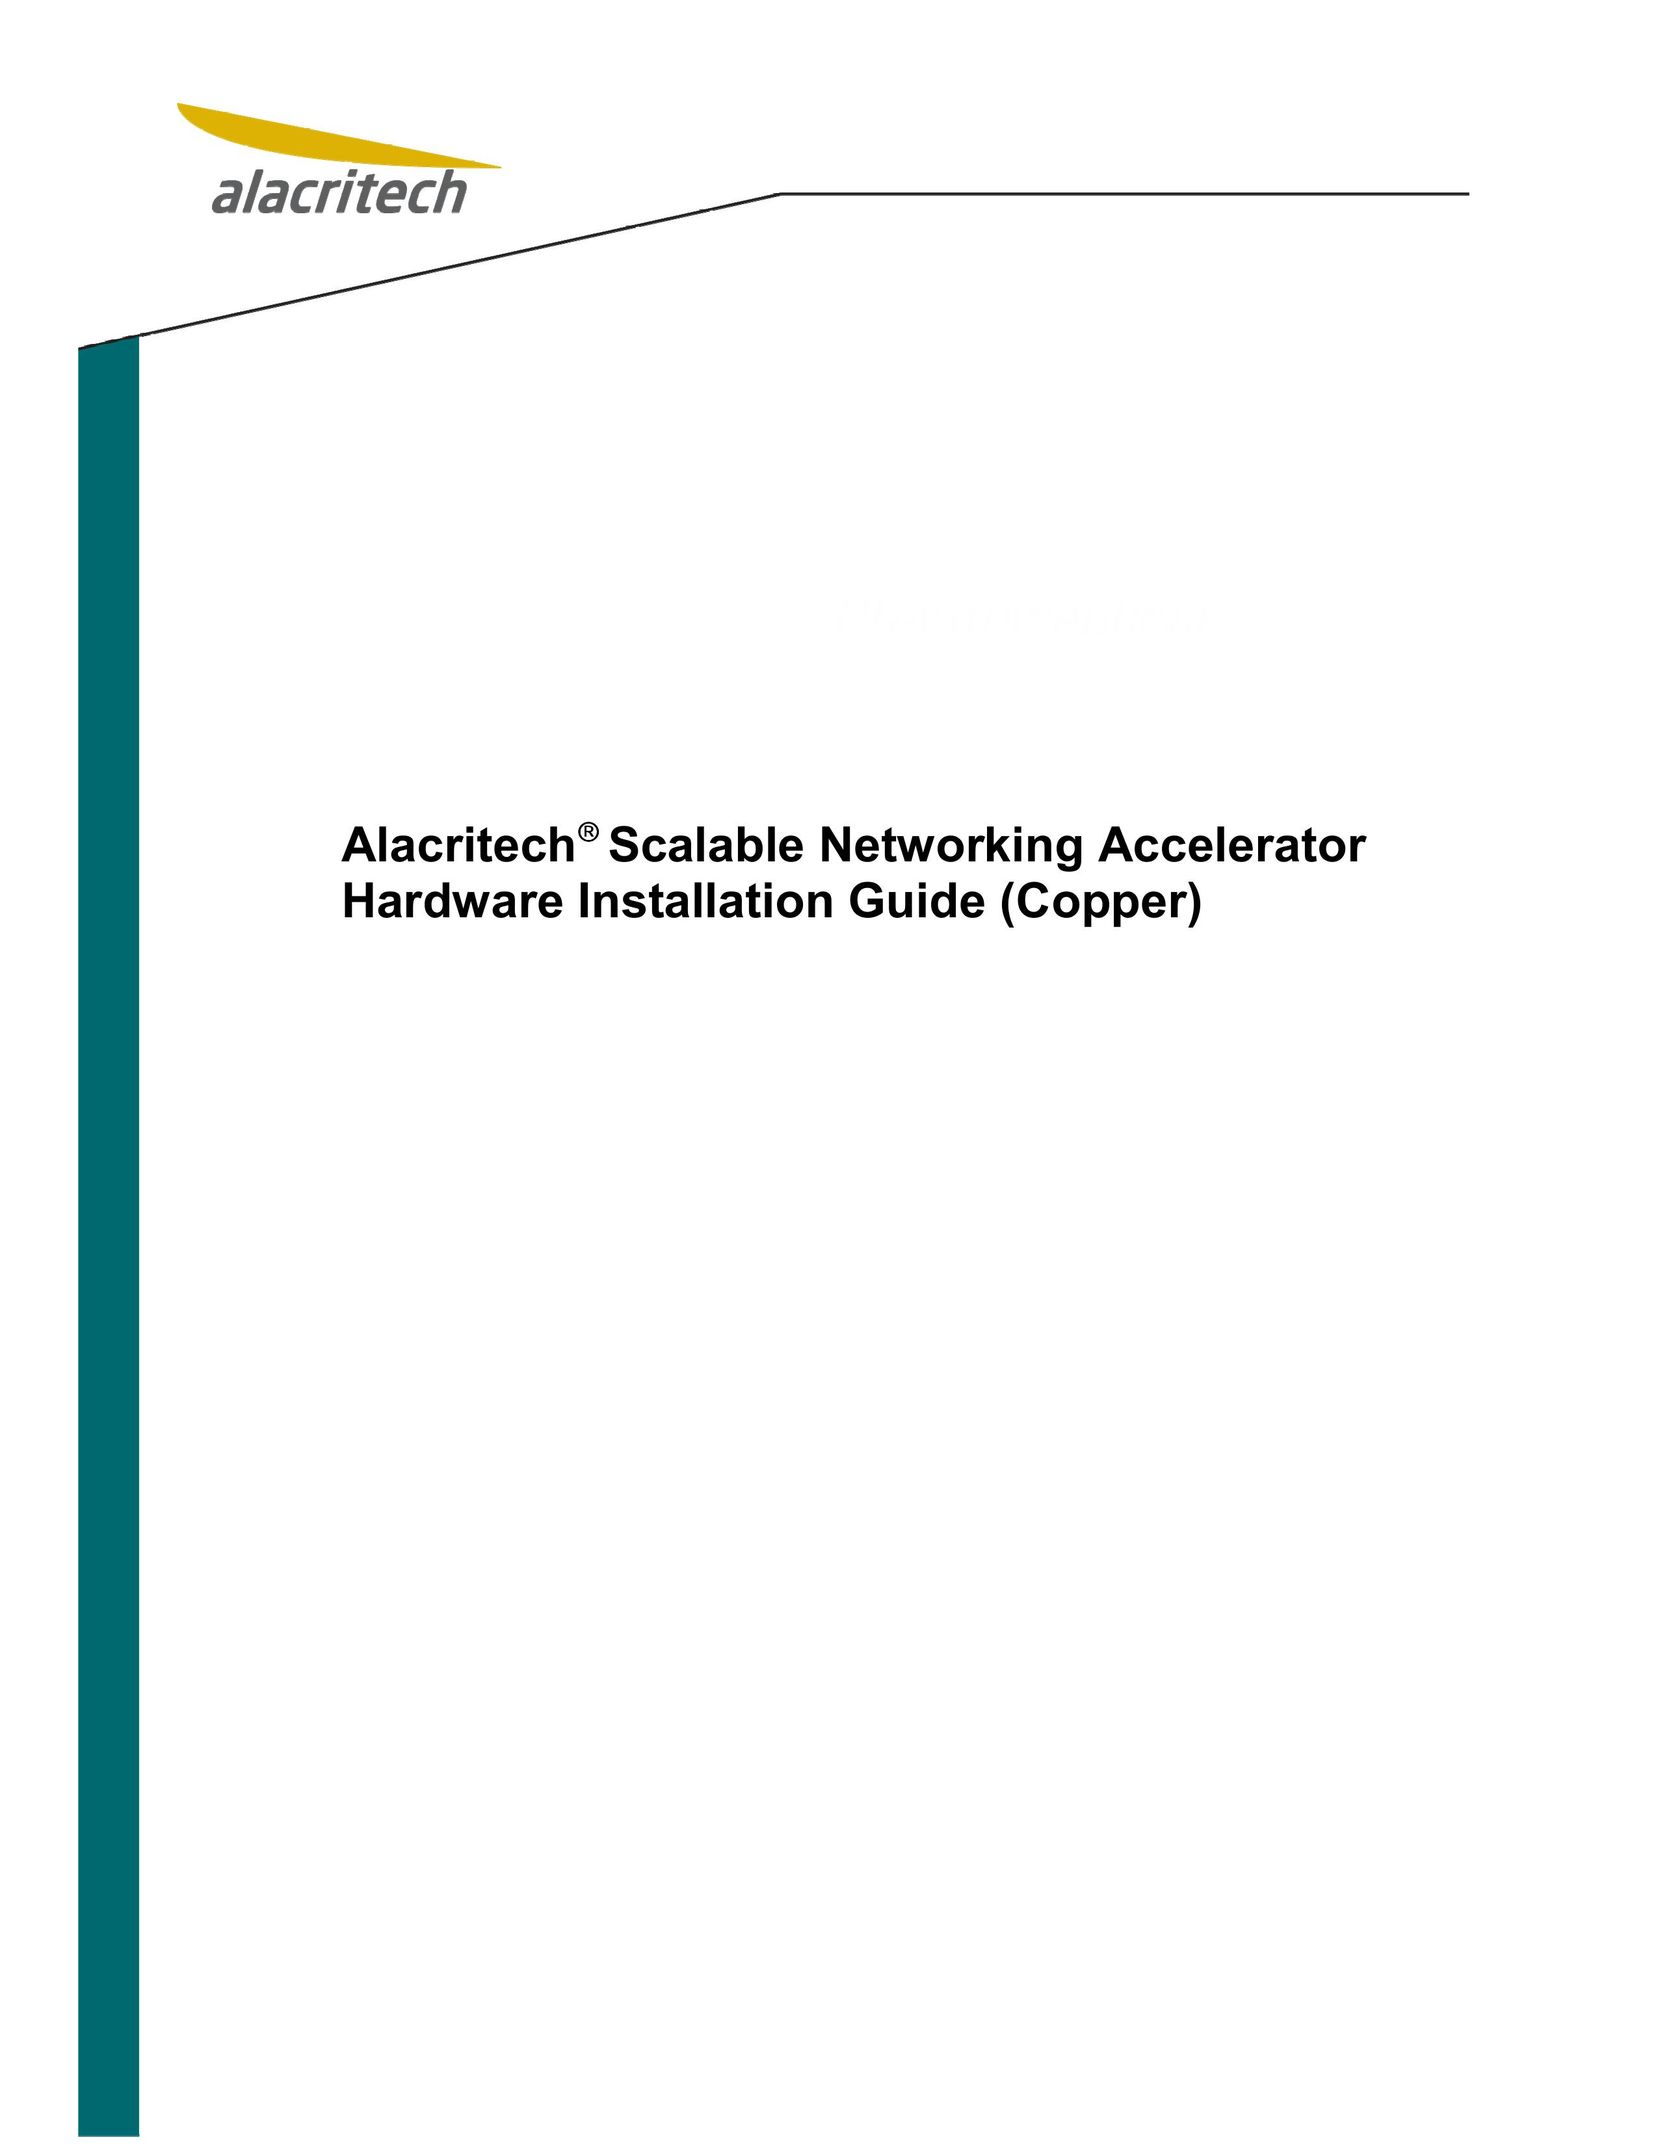 Alacritech Scalable Networking Accelerator Video Gaming Accessories User Manual